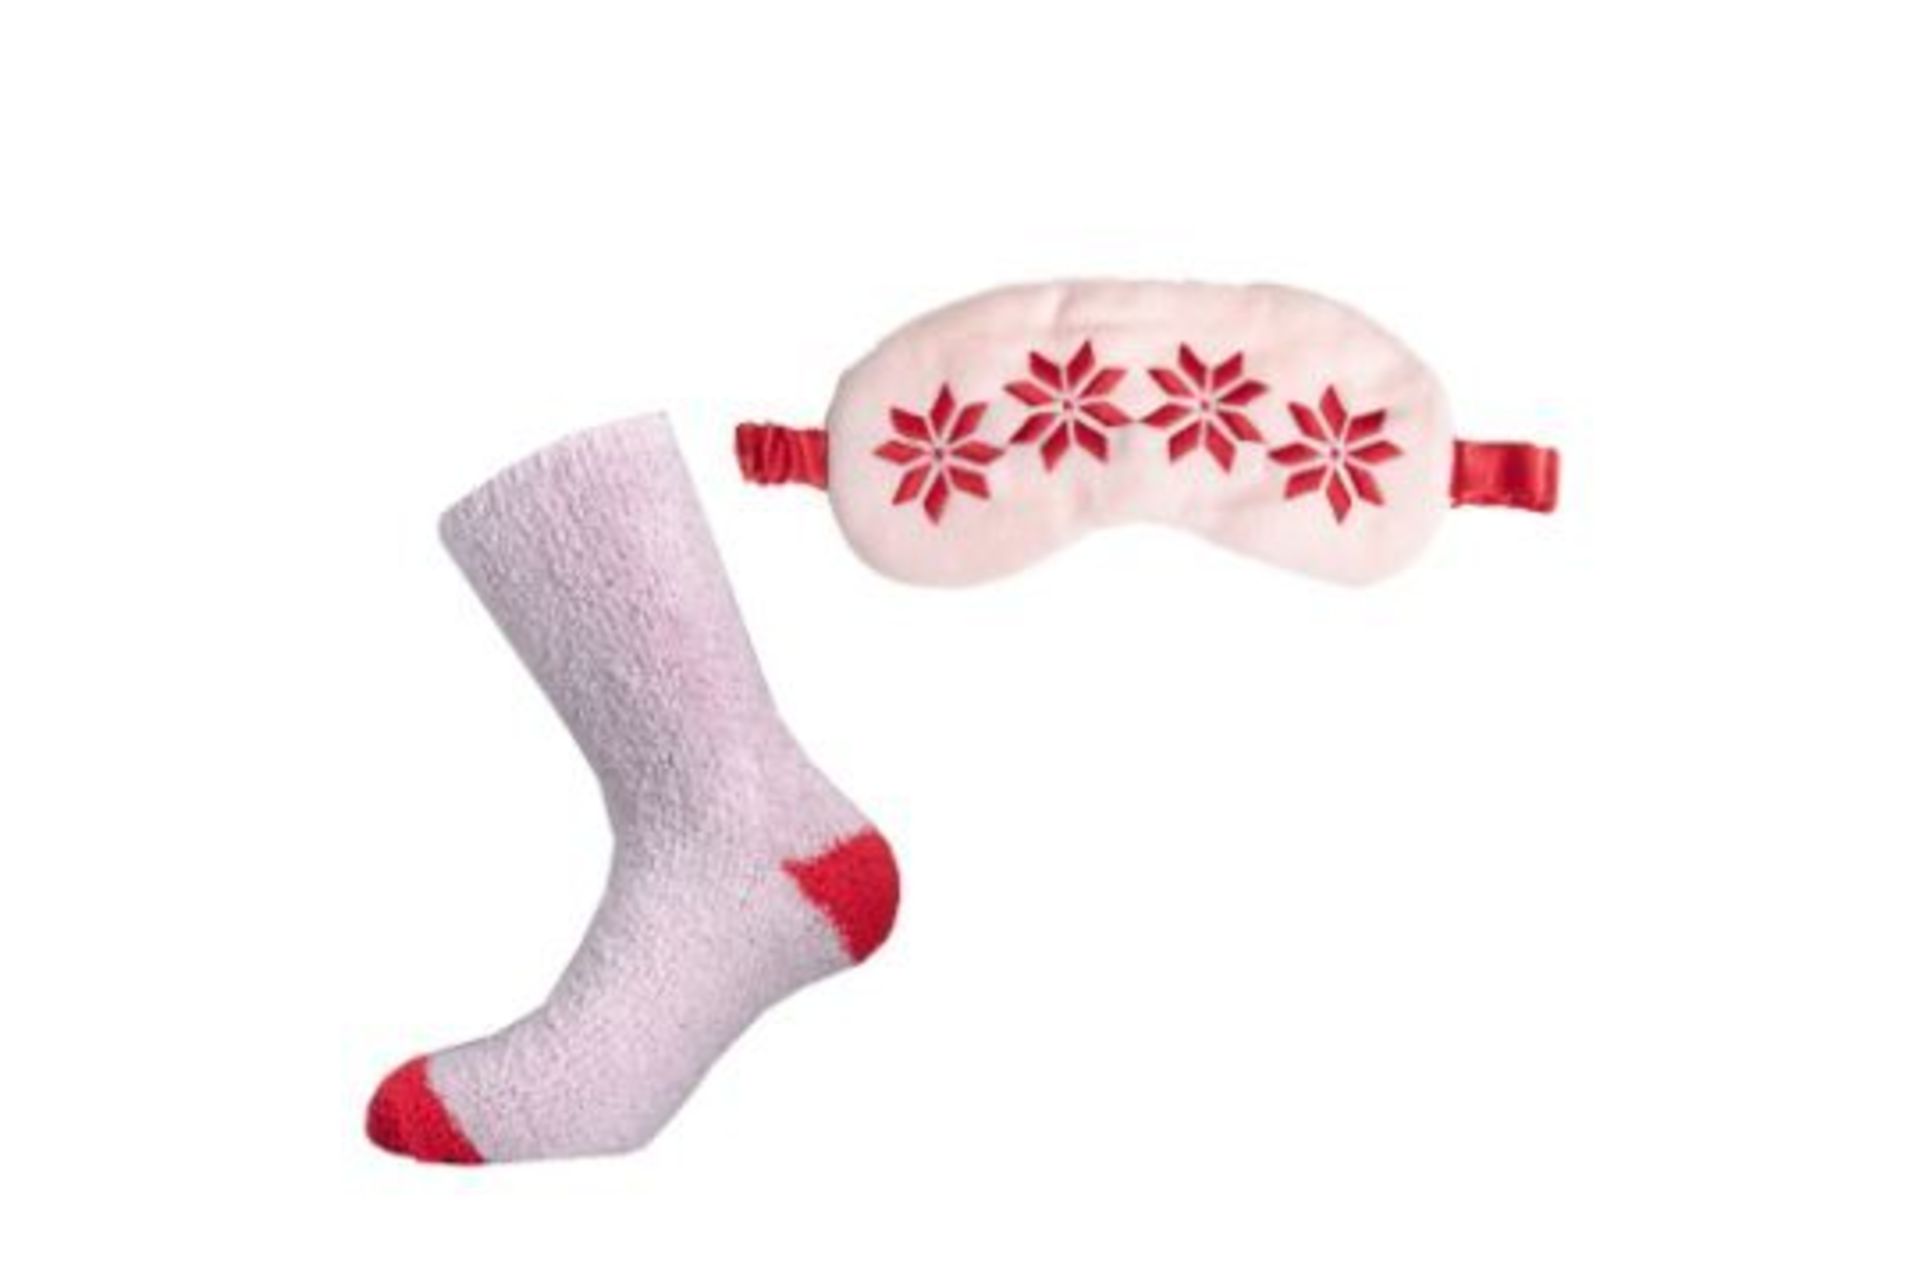 NEW PINK STAR DESIGN EYEMASK AND BED SOCKS